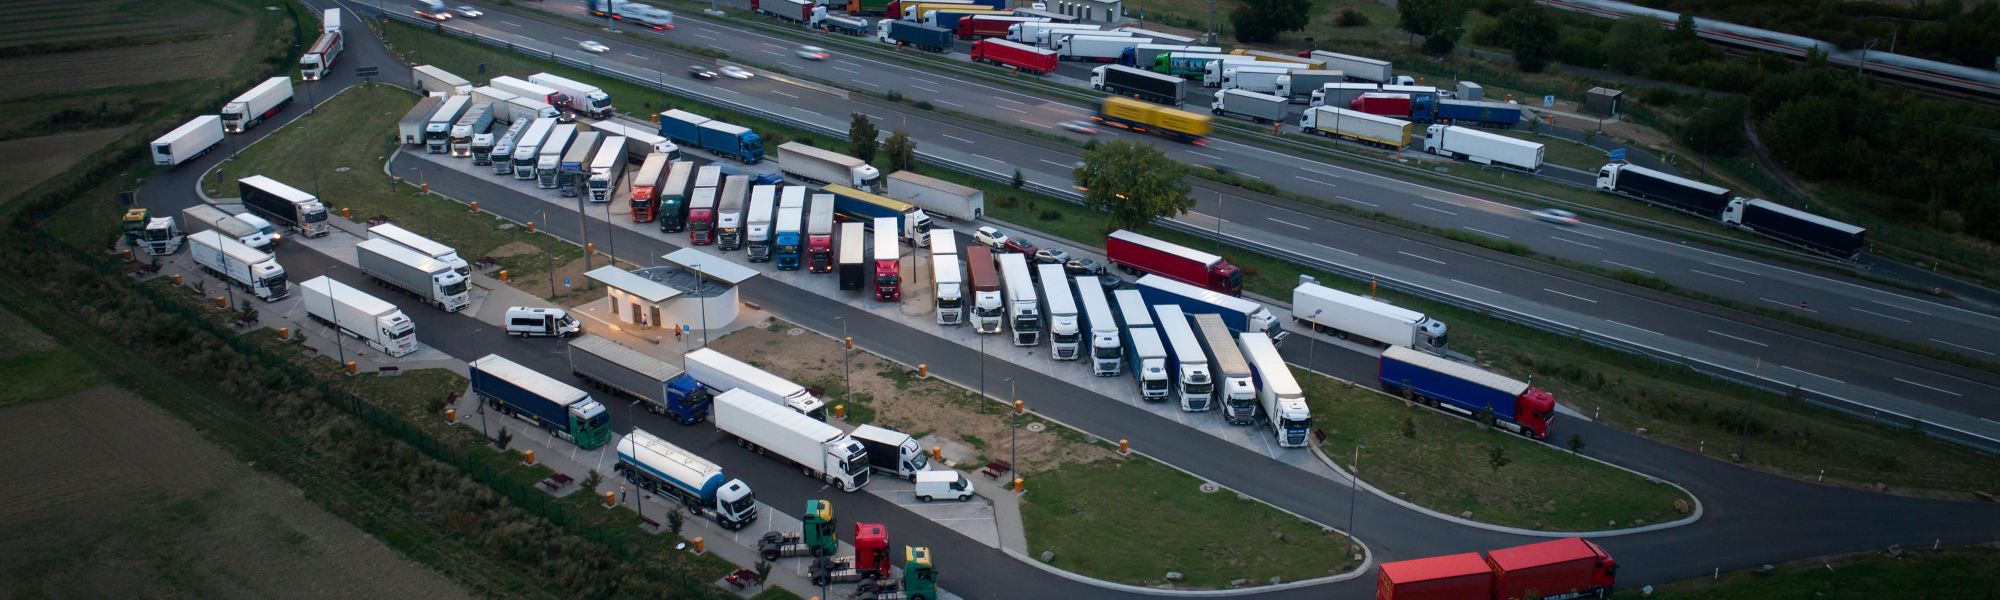 Employers, trade unions and parking operators are urging the European Commission to maintain a focused approach to certifying, upgrading, building, and funding safe and secure truck parking areas in the EU over the next three years.